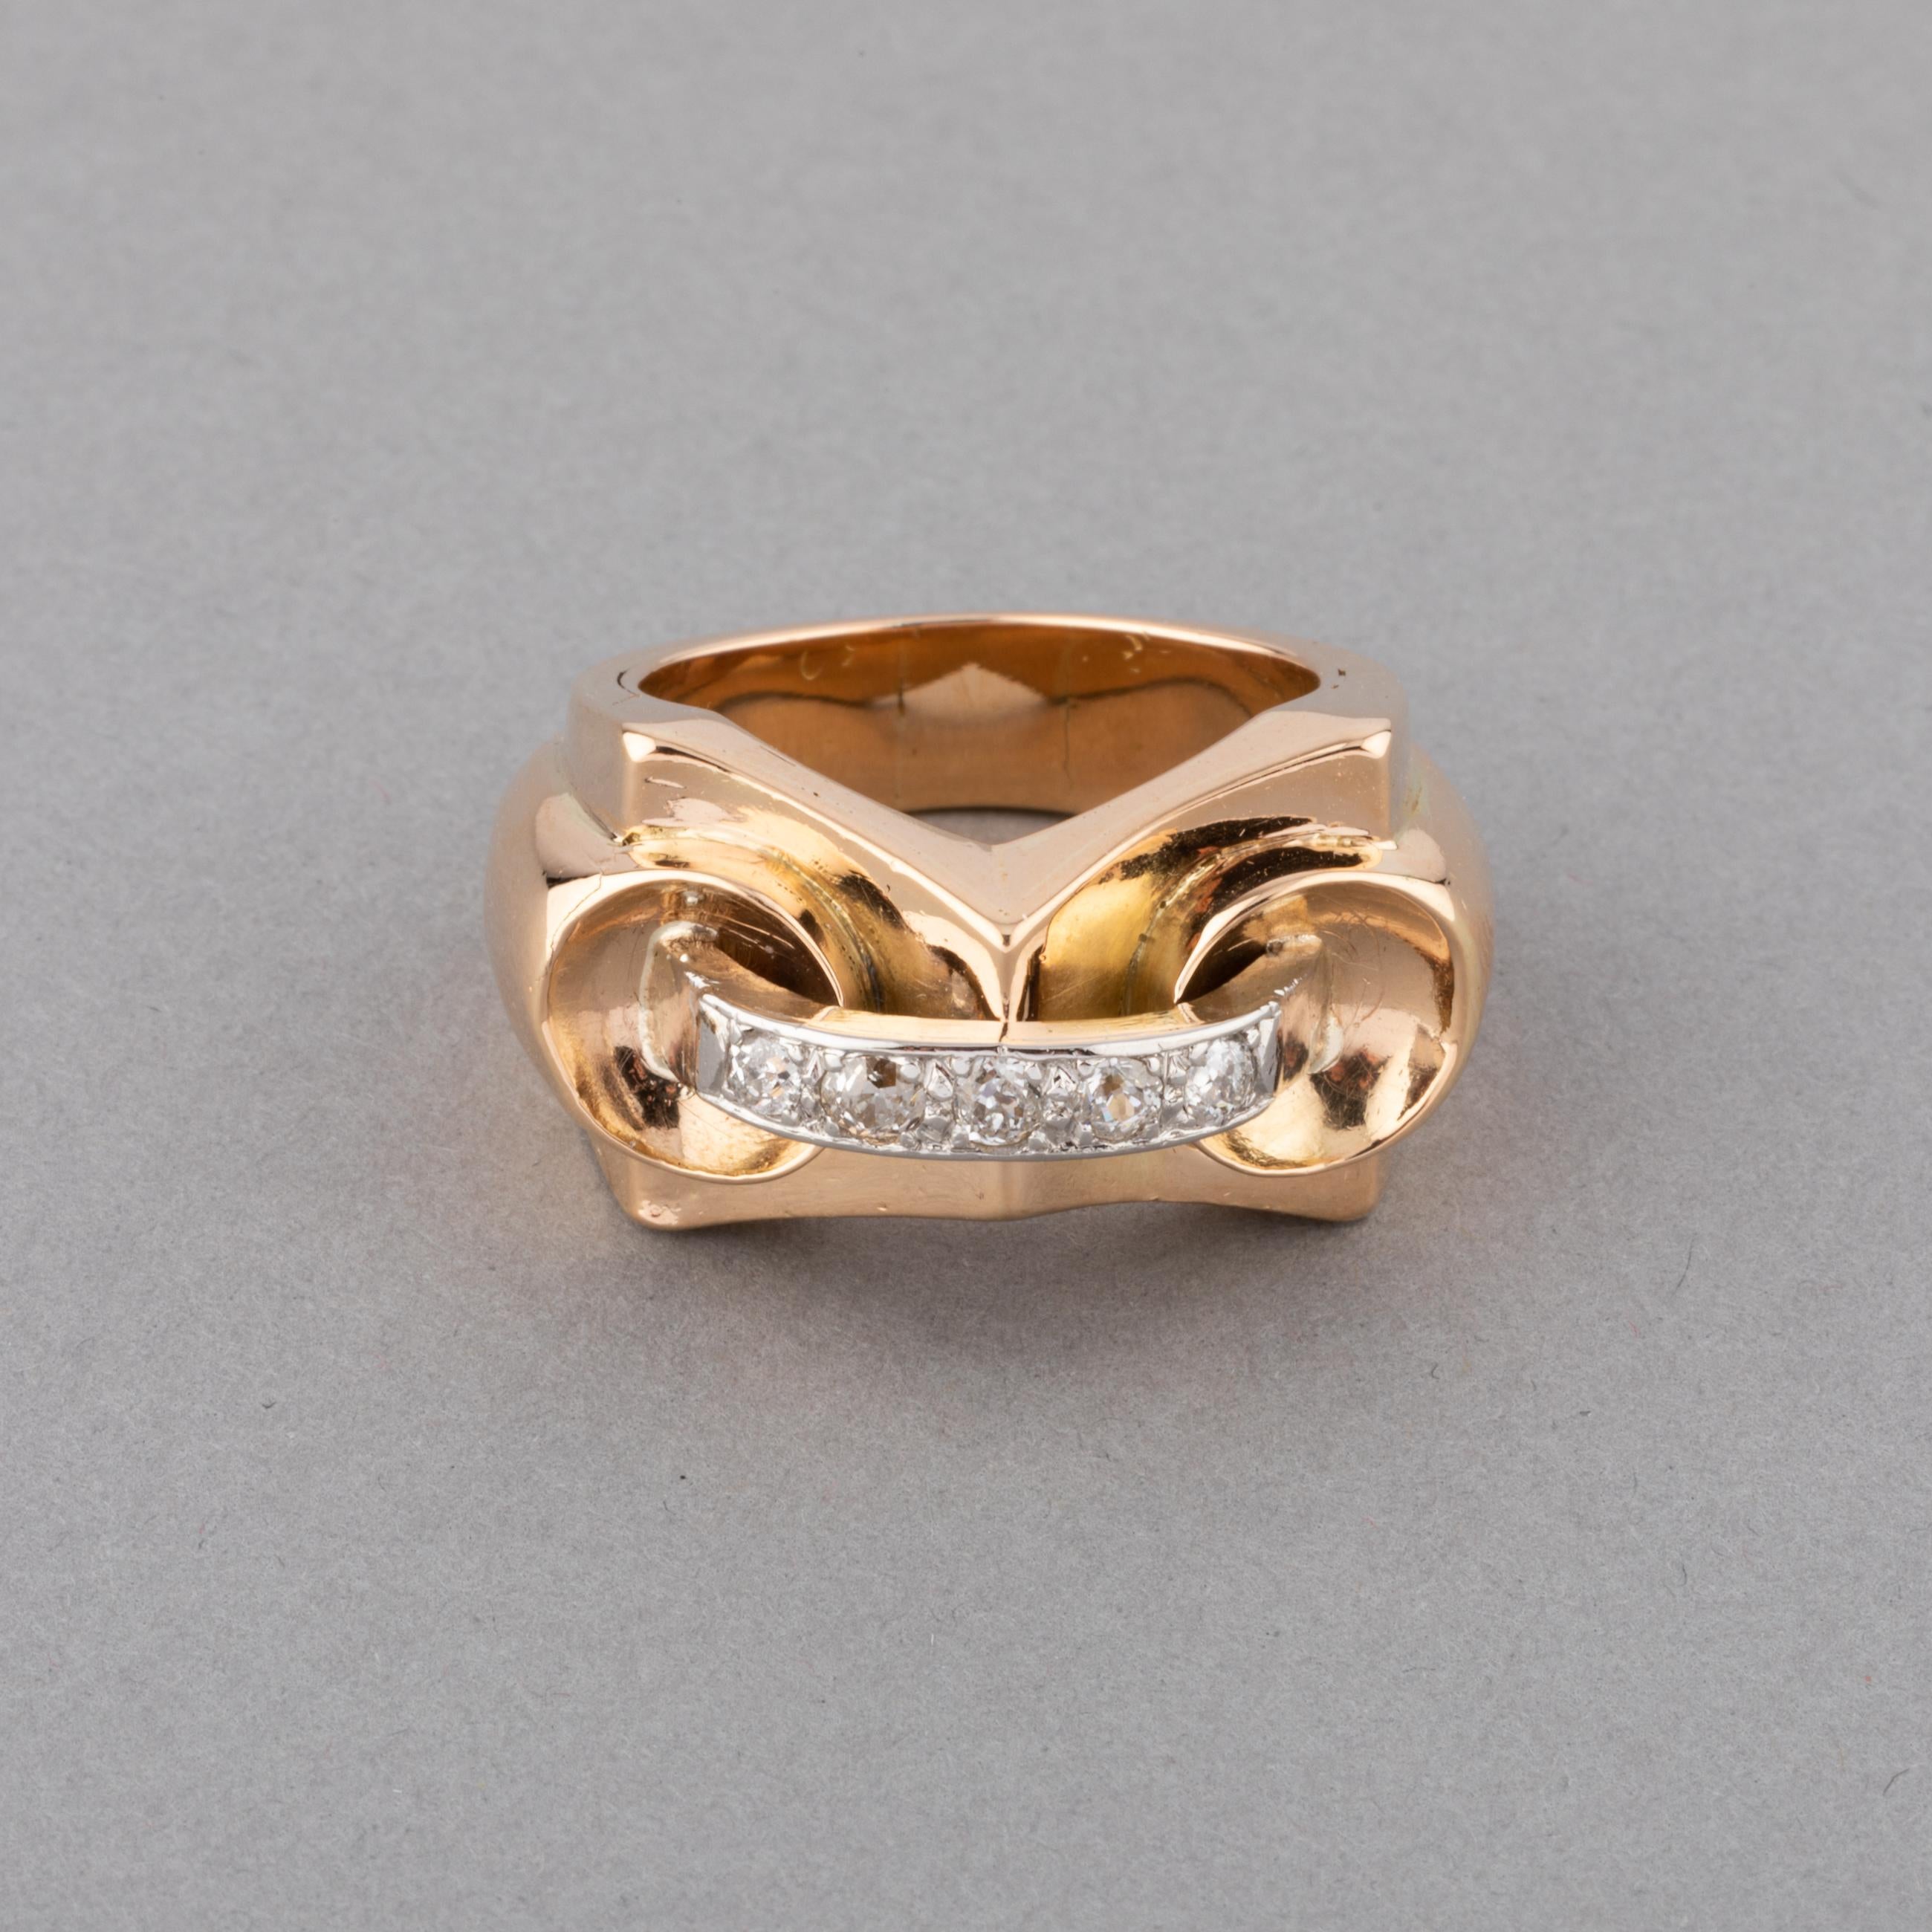 A lovely vintage ring, made in France circa 1940.
Made in yellow gold 18k and platinum. They are partly erased / polished but we can notice the eagle head Hallmark and Dog head hallmark for gold and platinum.
The ring has presence, the size is 57.5